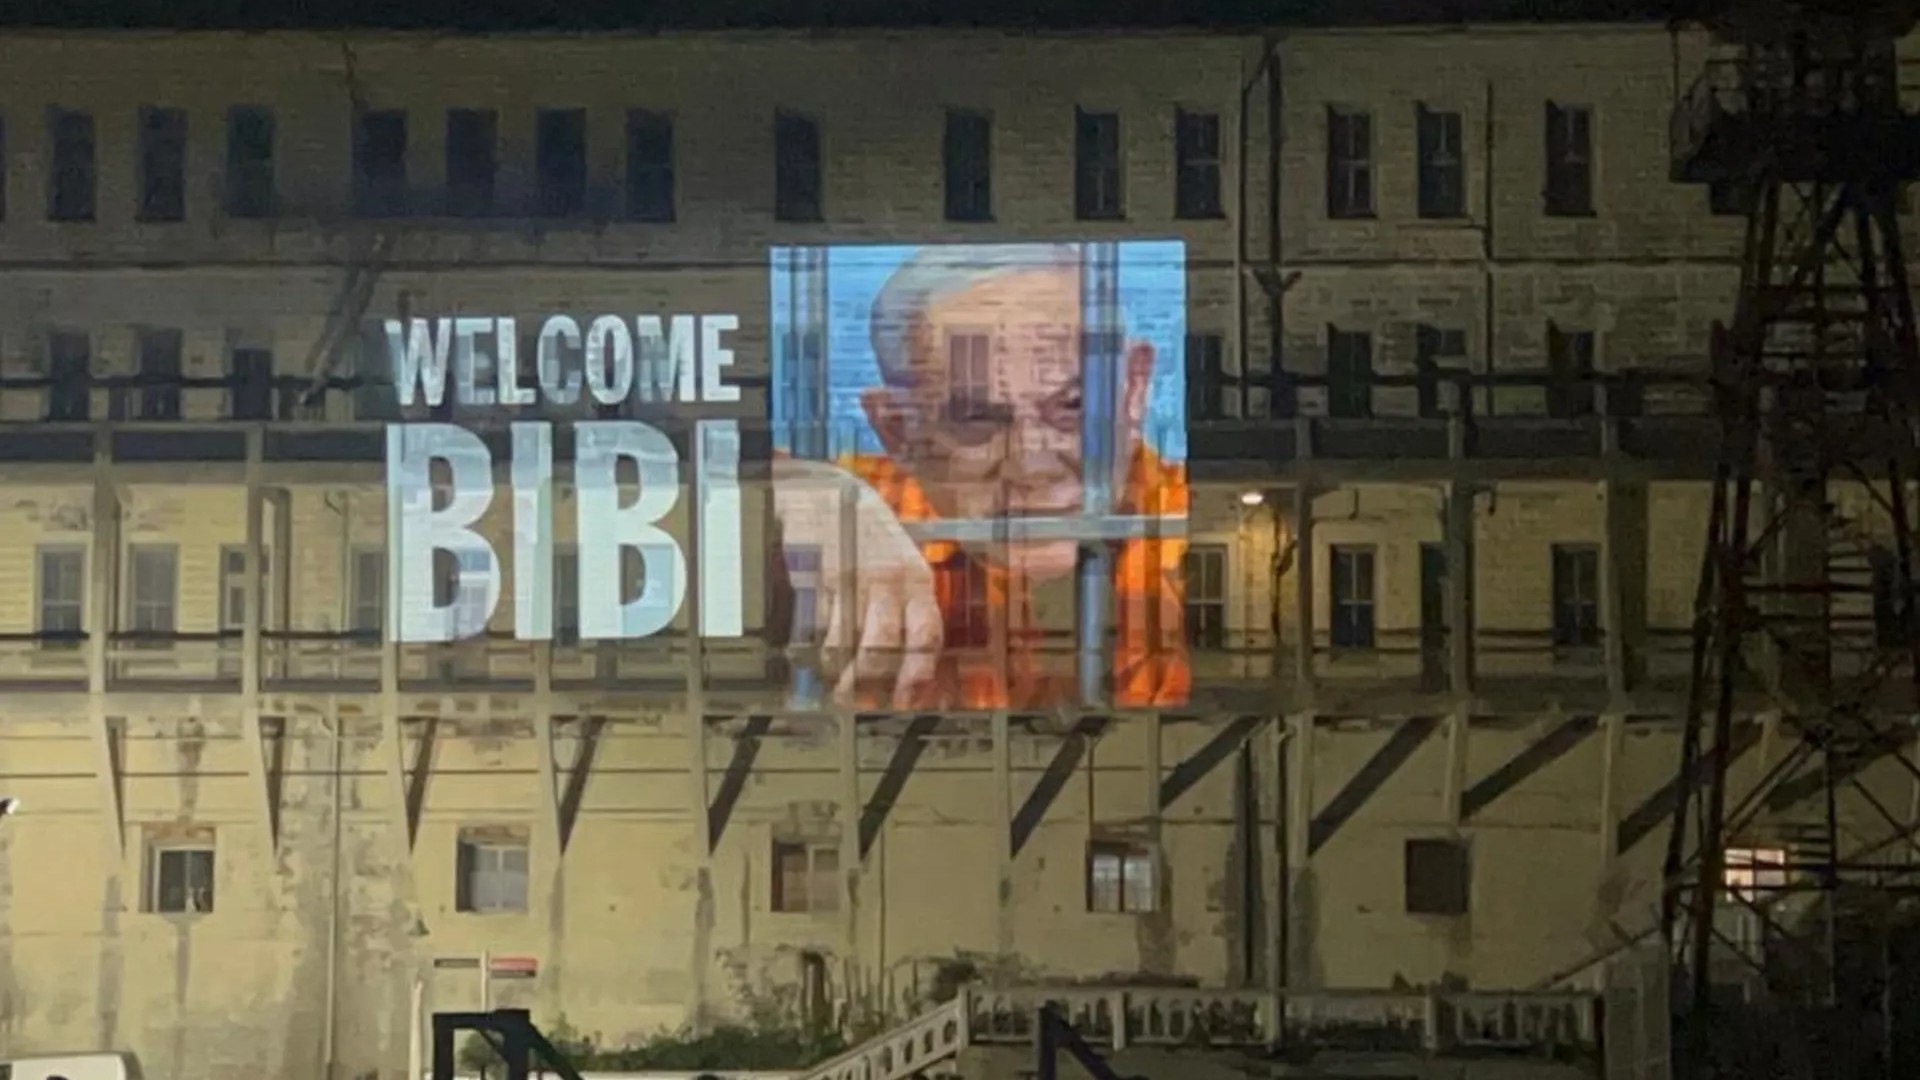 An anti-Netanyahu image is projected on to the Alcatraz prison in California by an Israeli-American protest group (Screenshot/X)